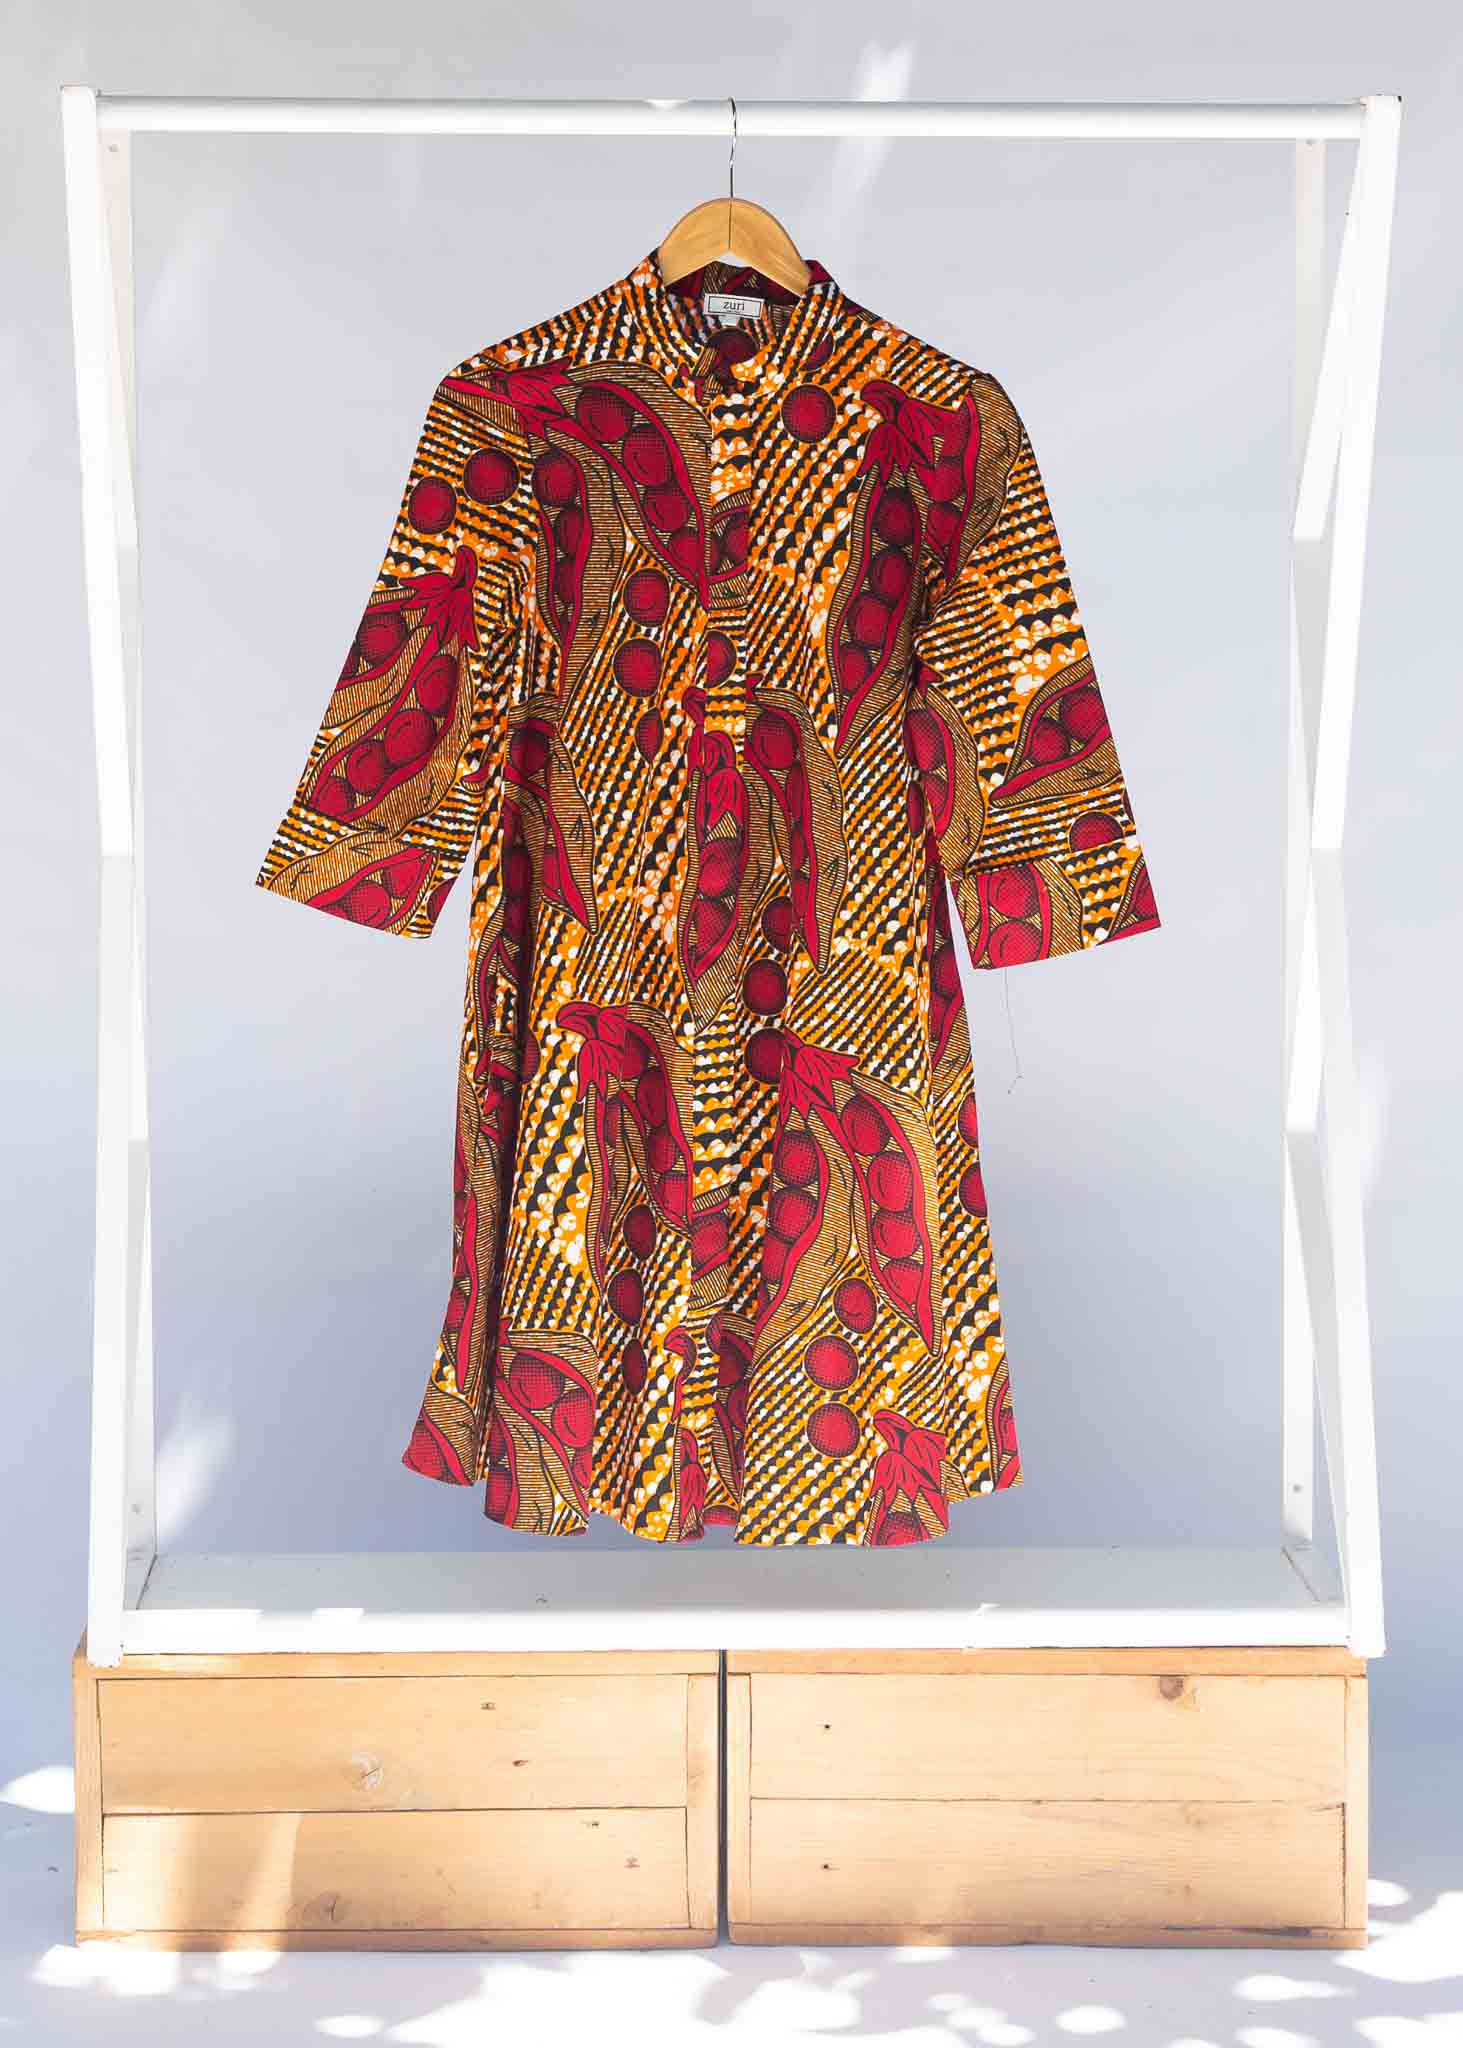 Display of brown dress with red snap pea print.